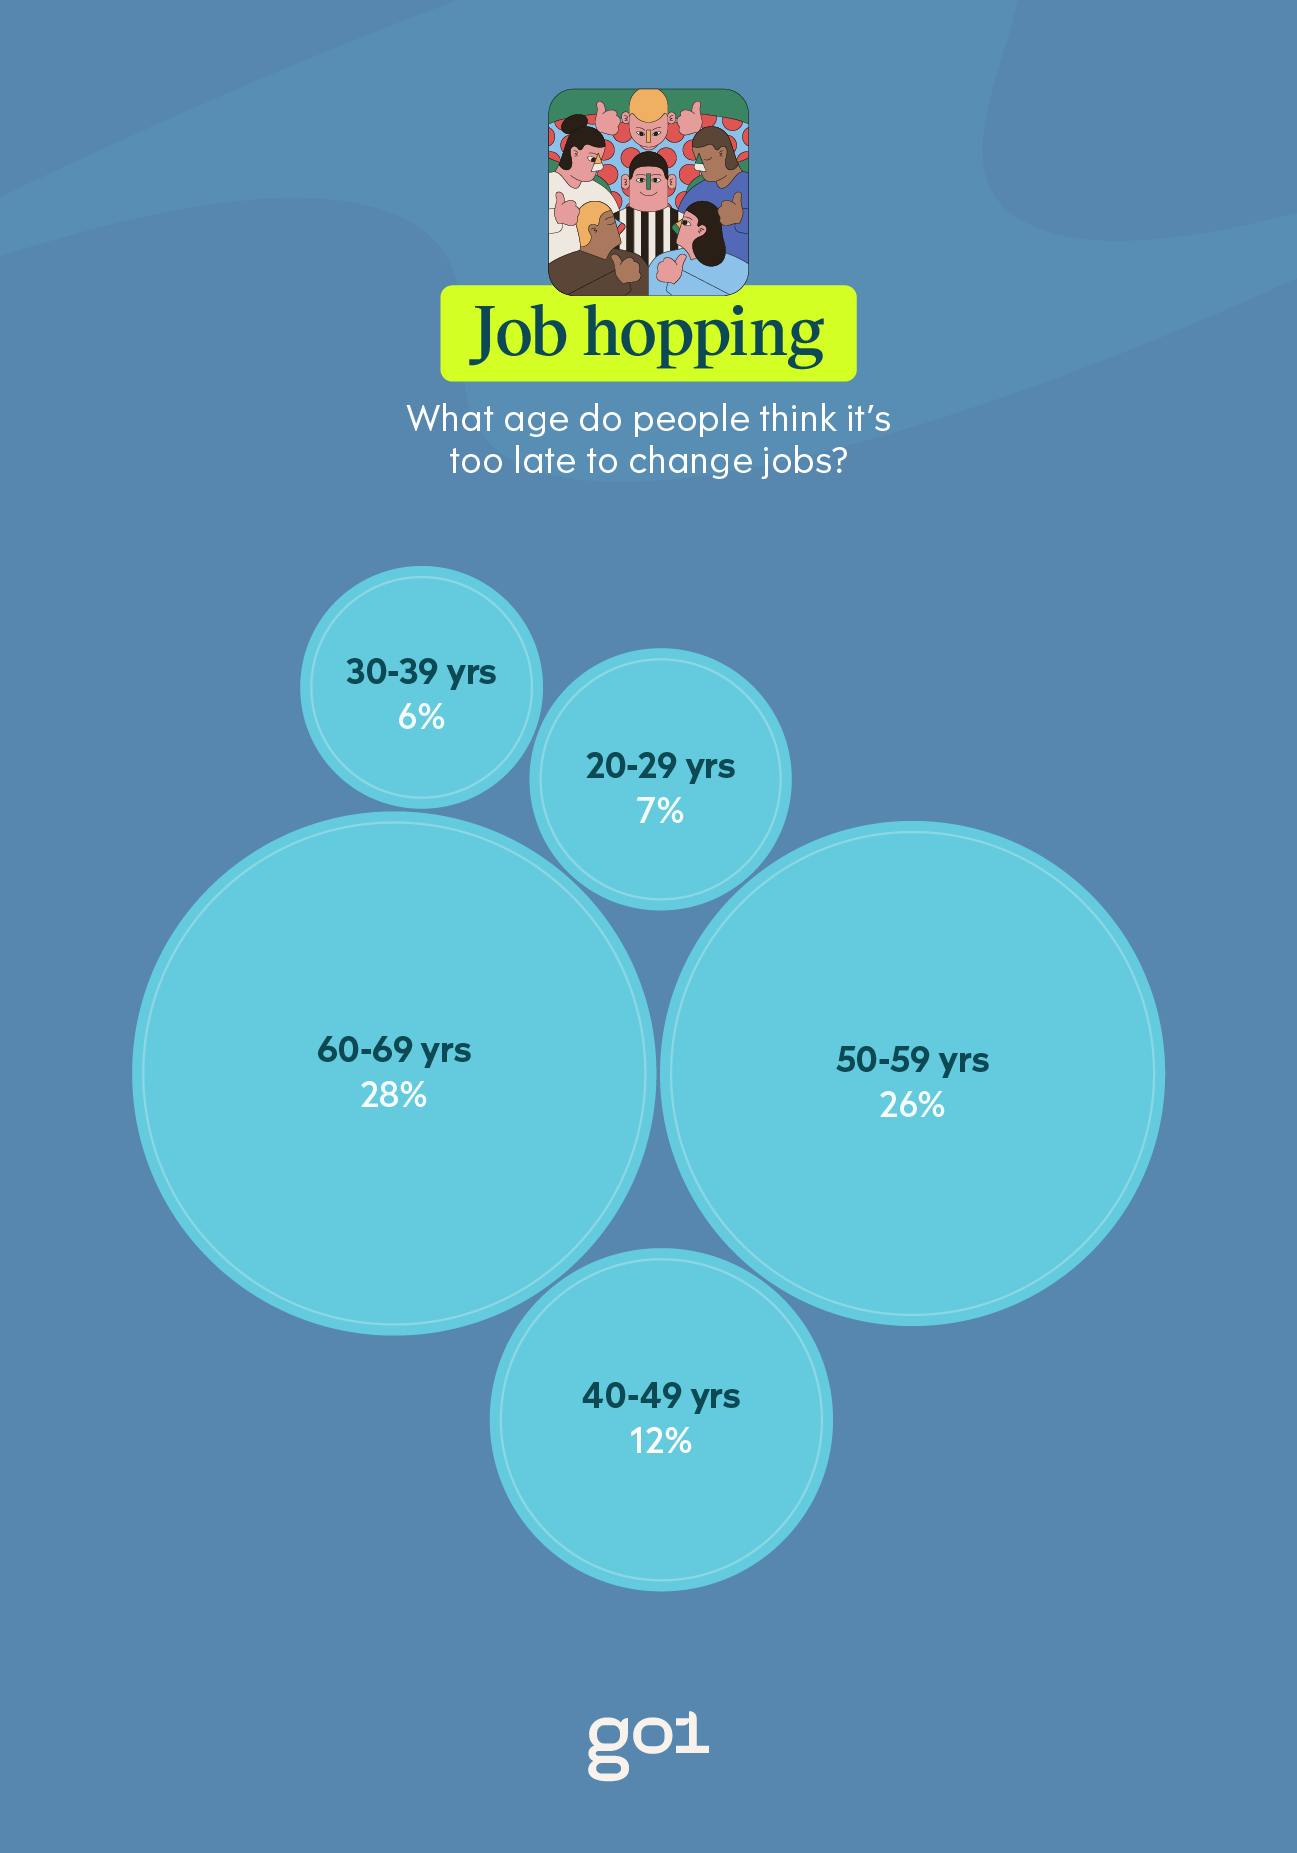 A chart showing the age that people think it's too late to change jobs